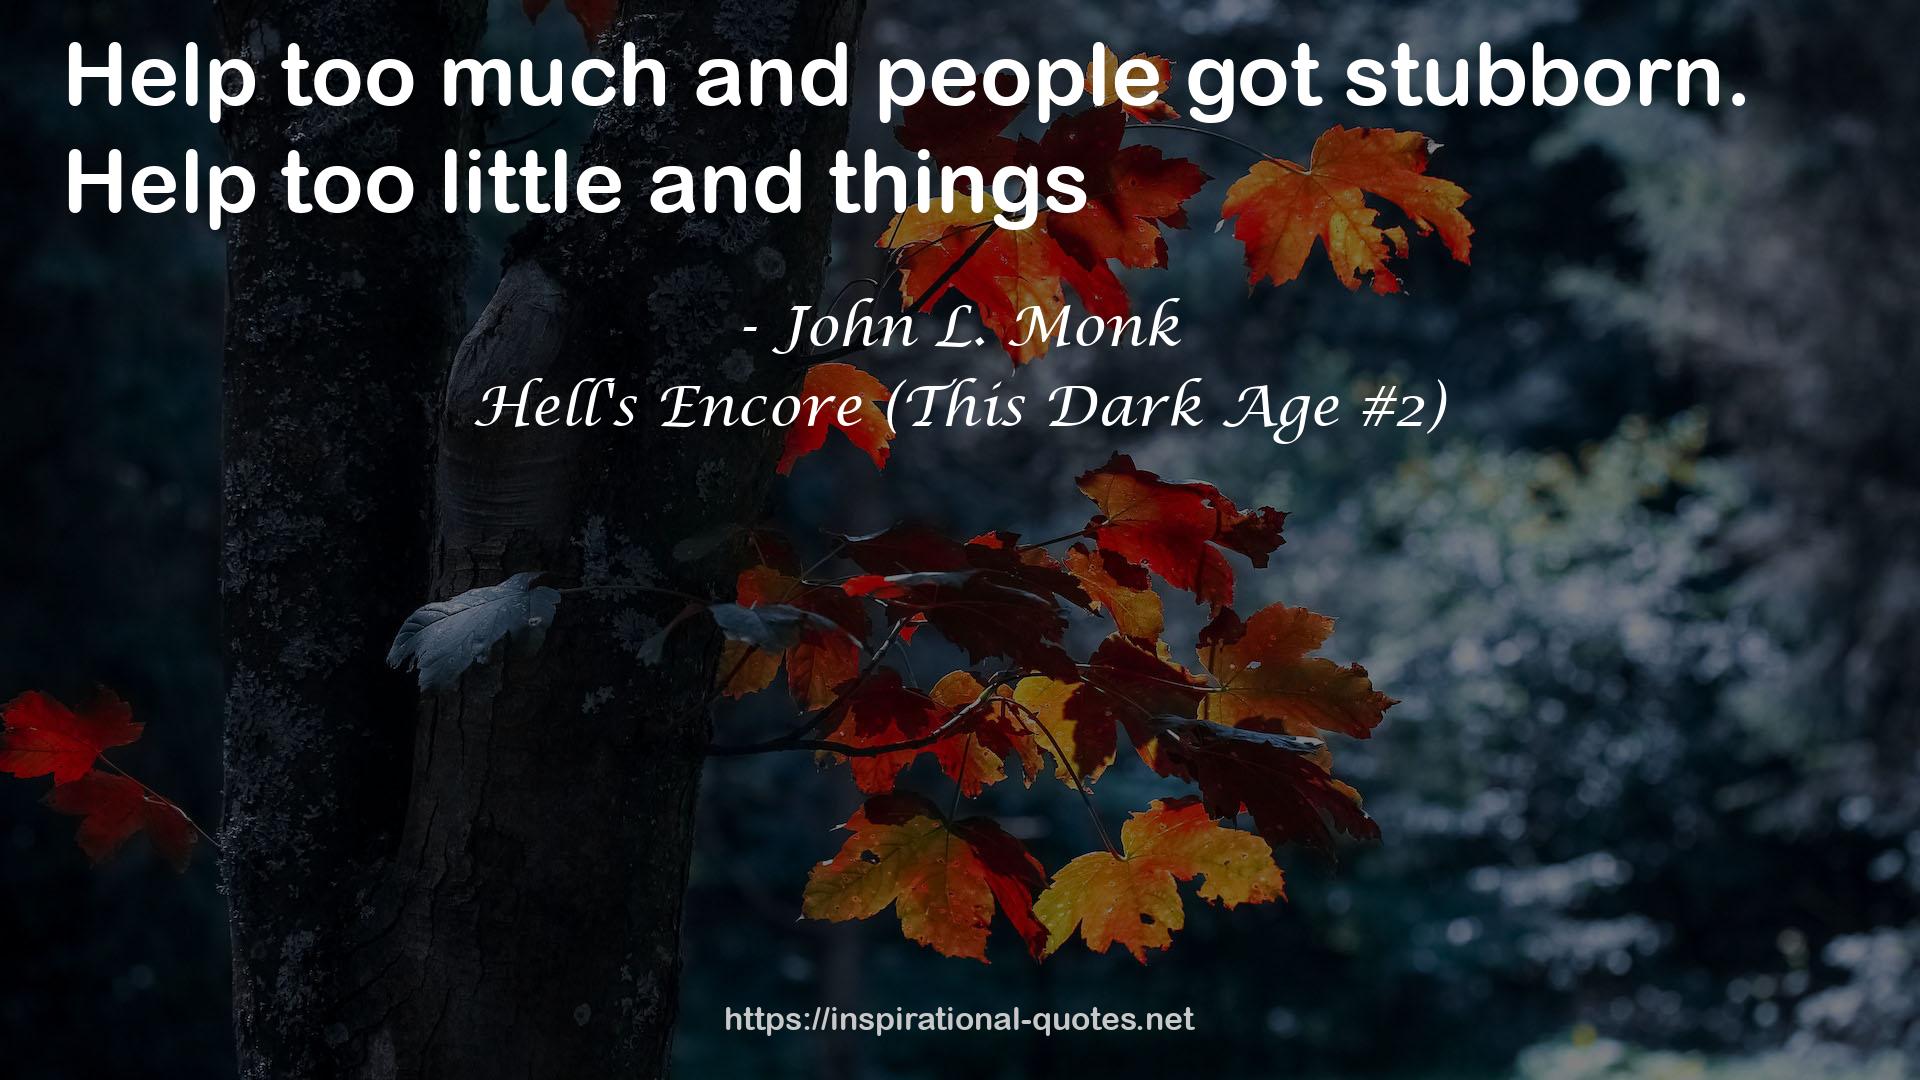 Hell's Encore (This Dark Age #2) QUOTES